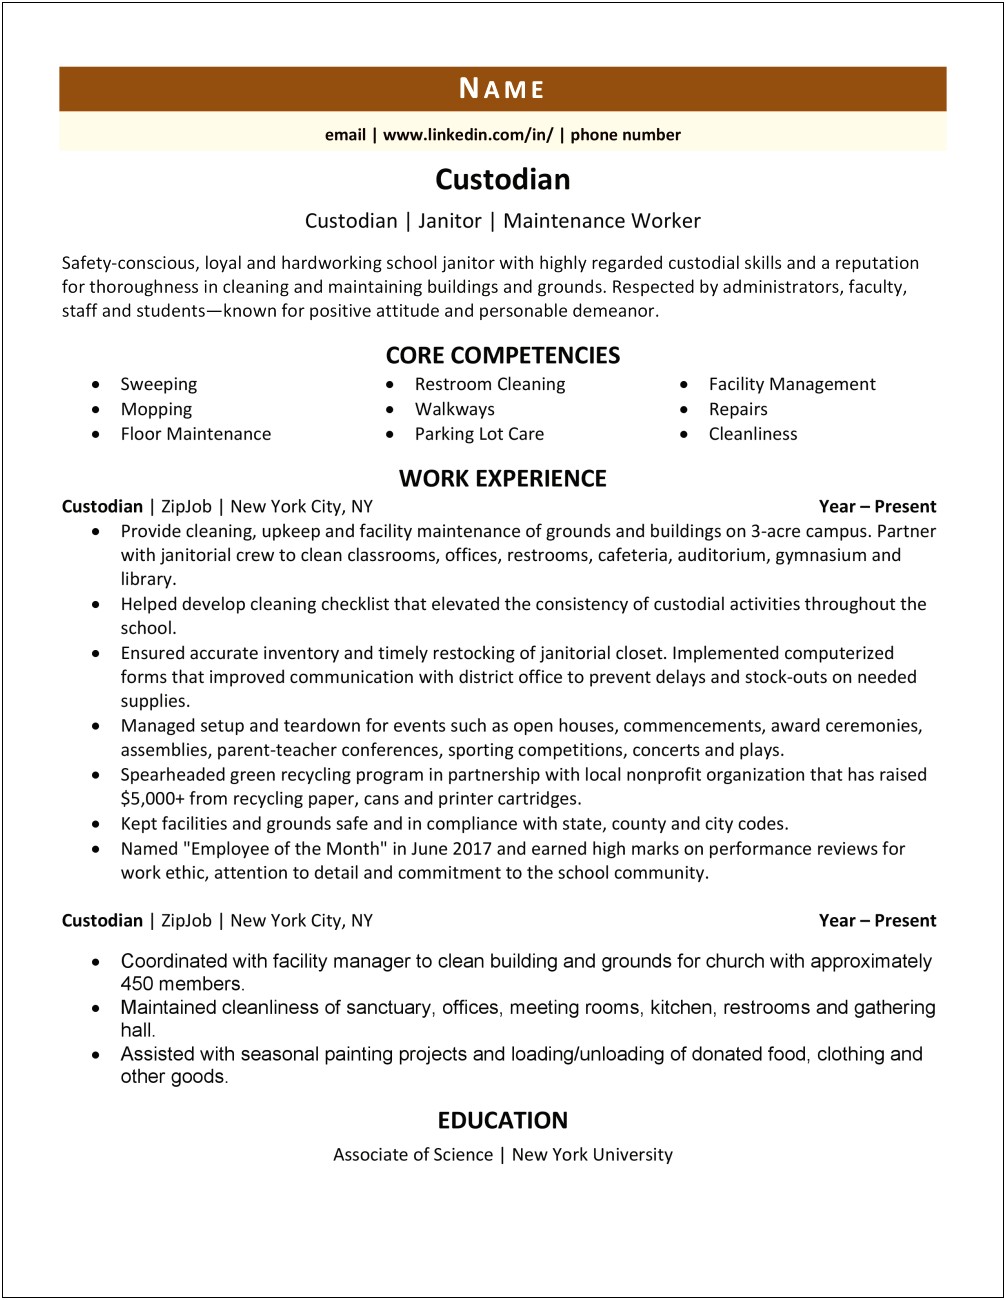 Resume Examples For Janitorial Services